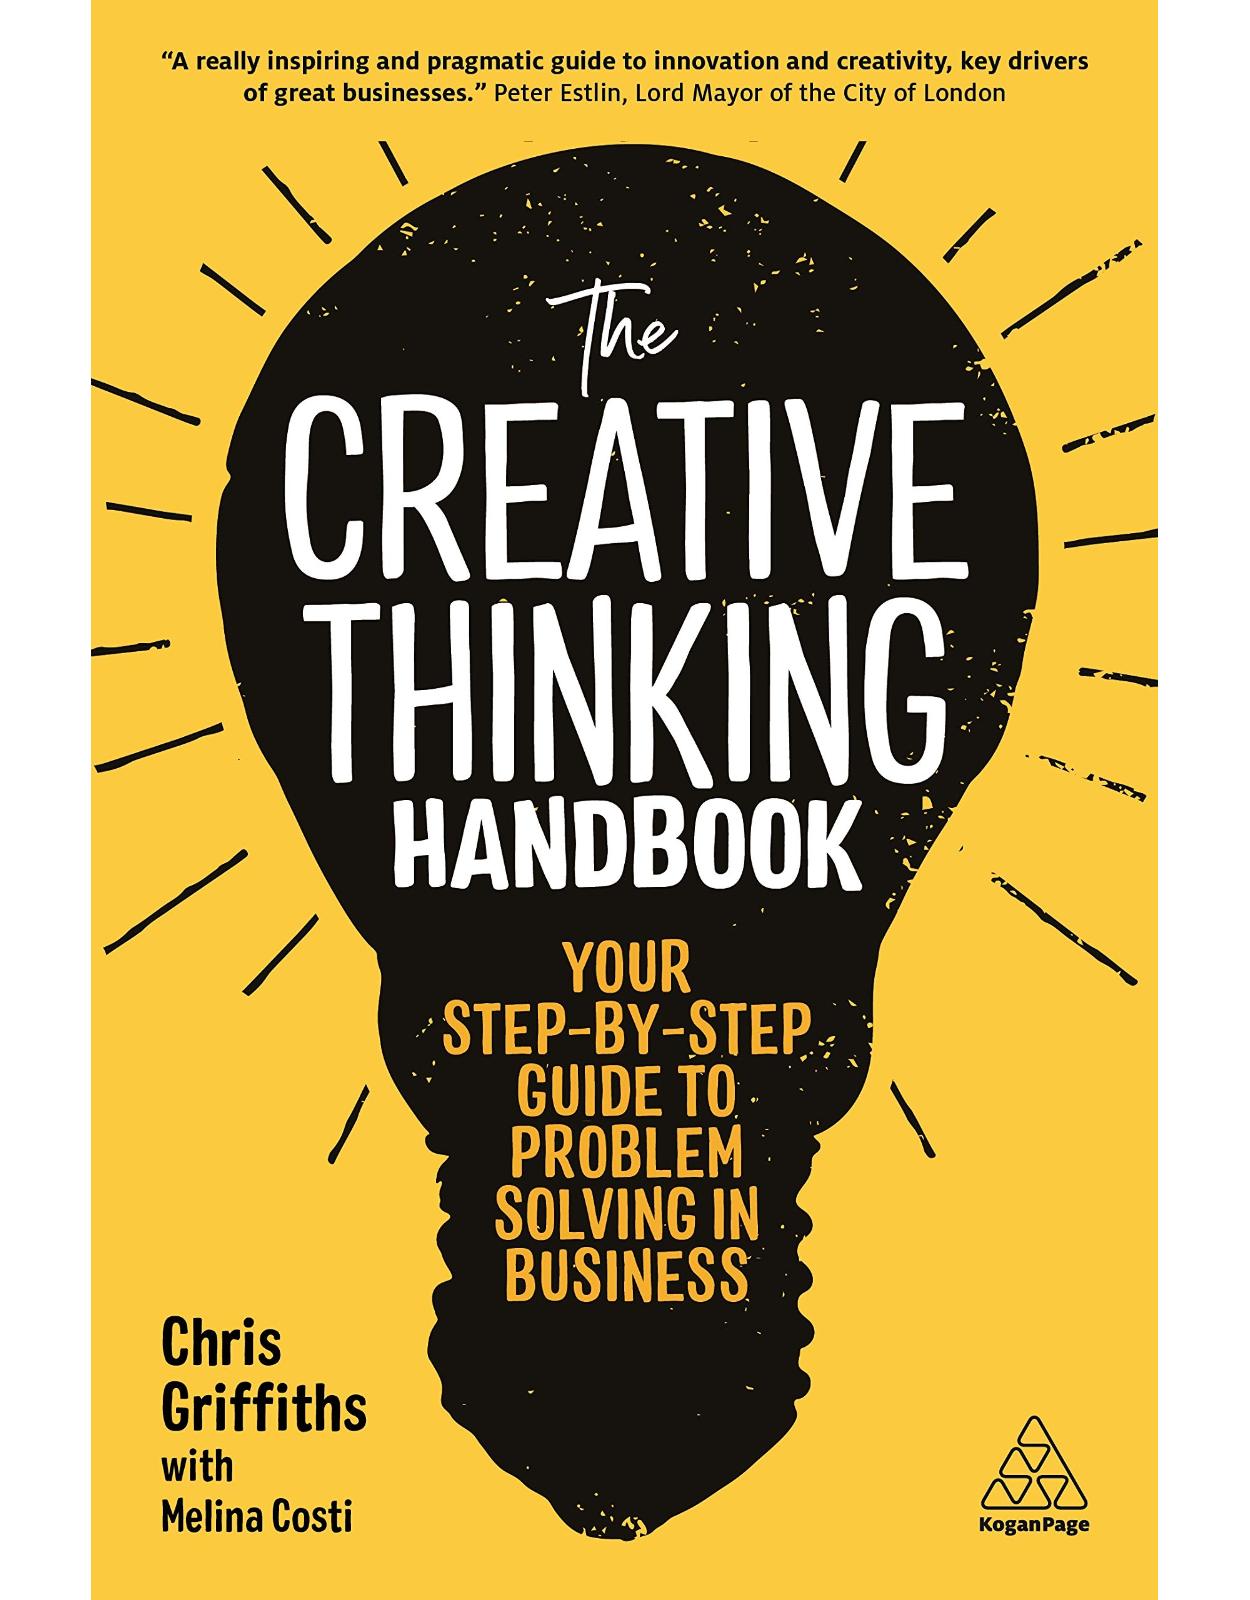 The Creative Thinking Handbook: Your Step-by-Step Guide to Problem Solving in Business